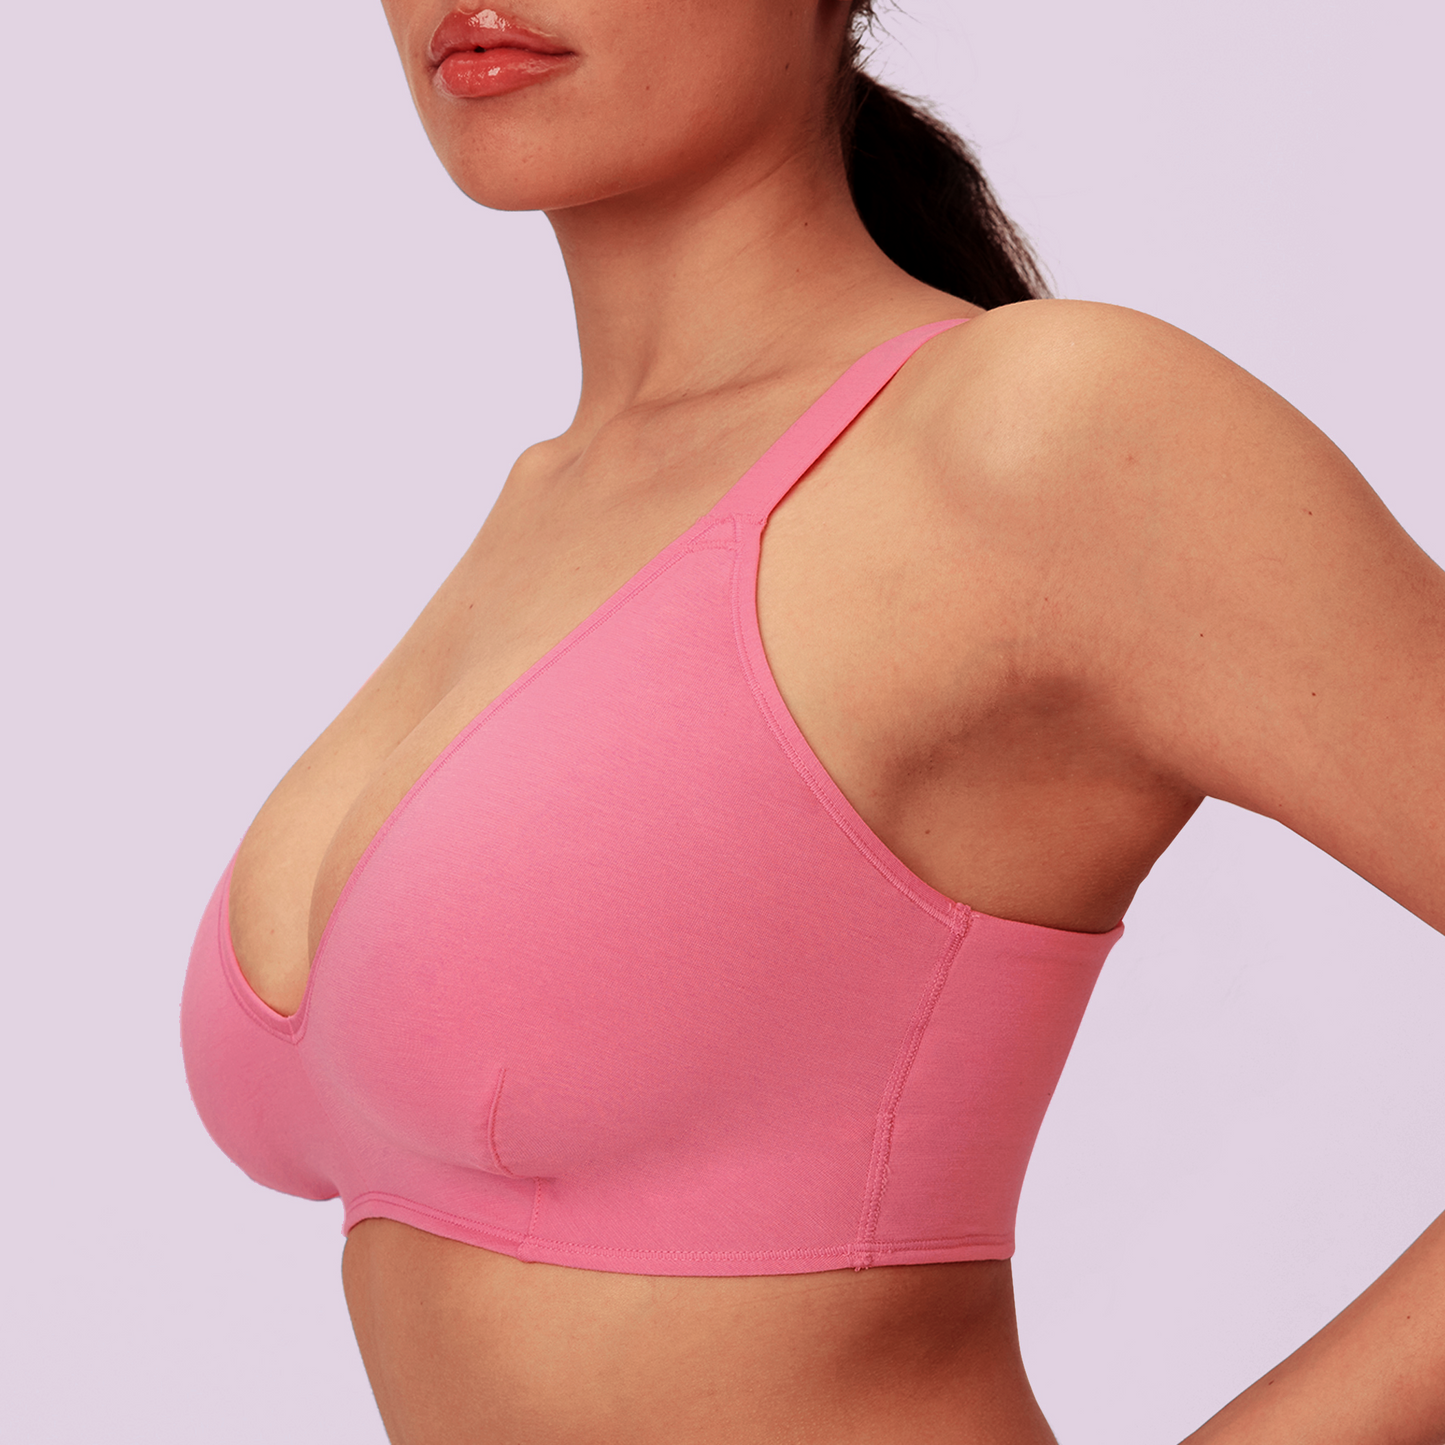 Vintage Soft Triangle Bralette | New:Cotton (Eightball)